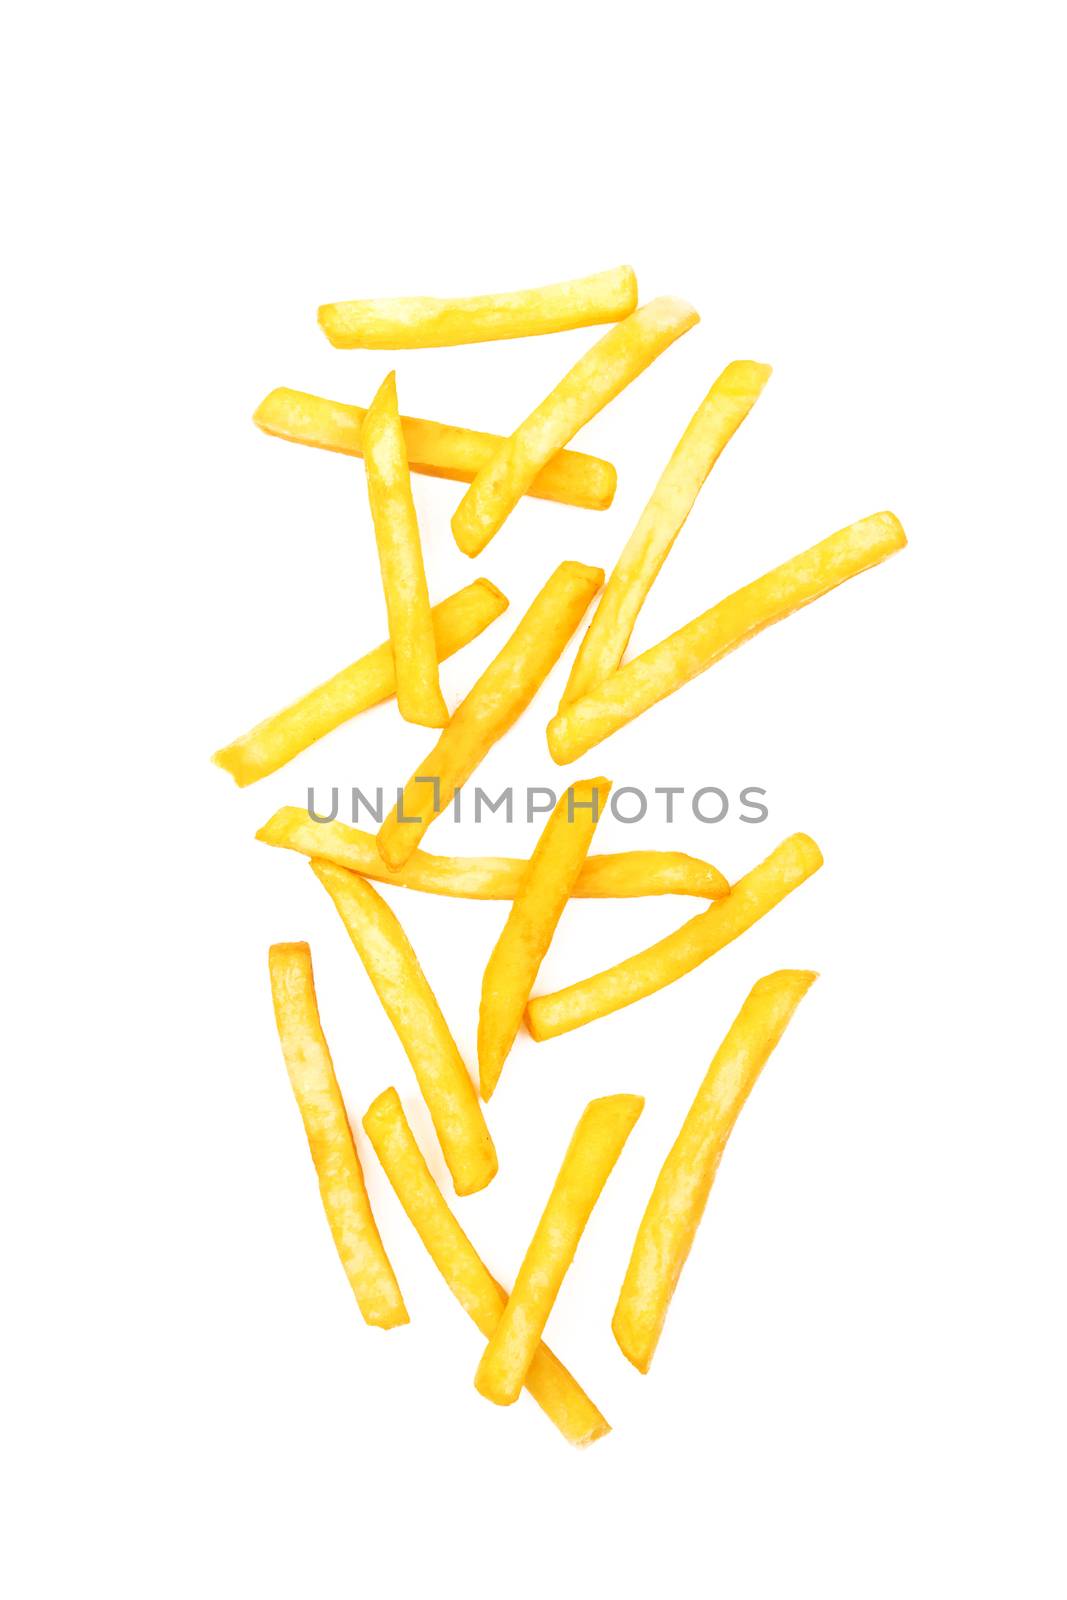 French fries by pioneer111